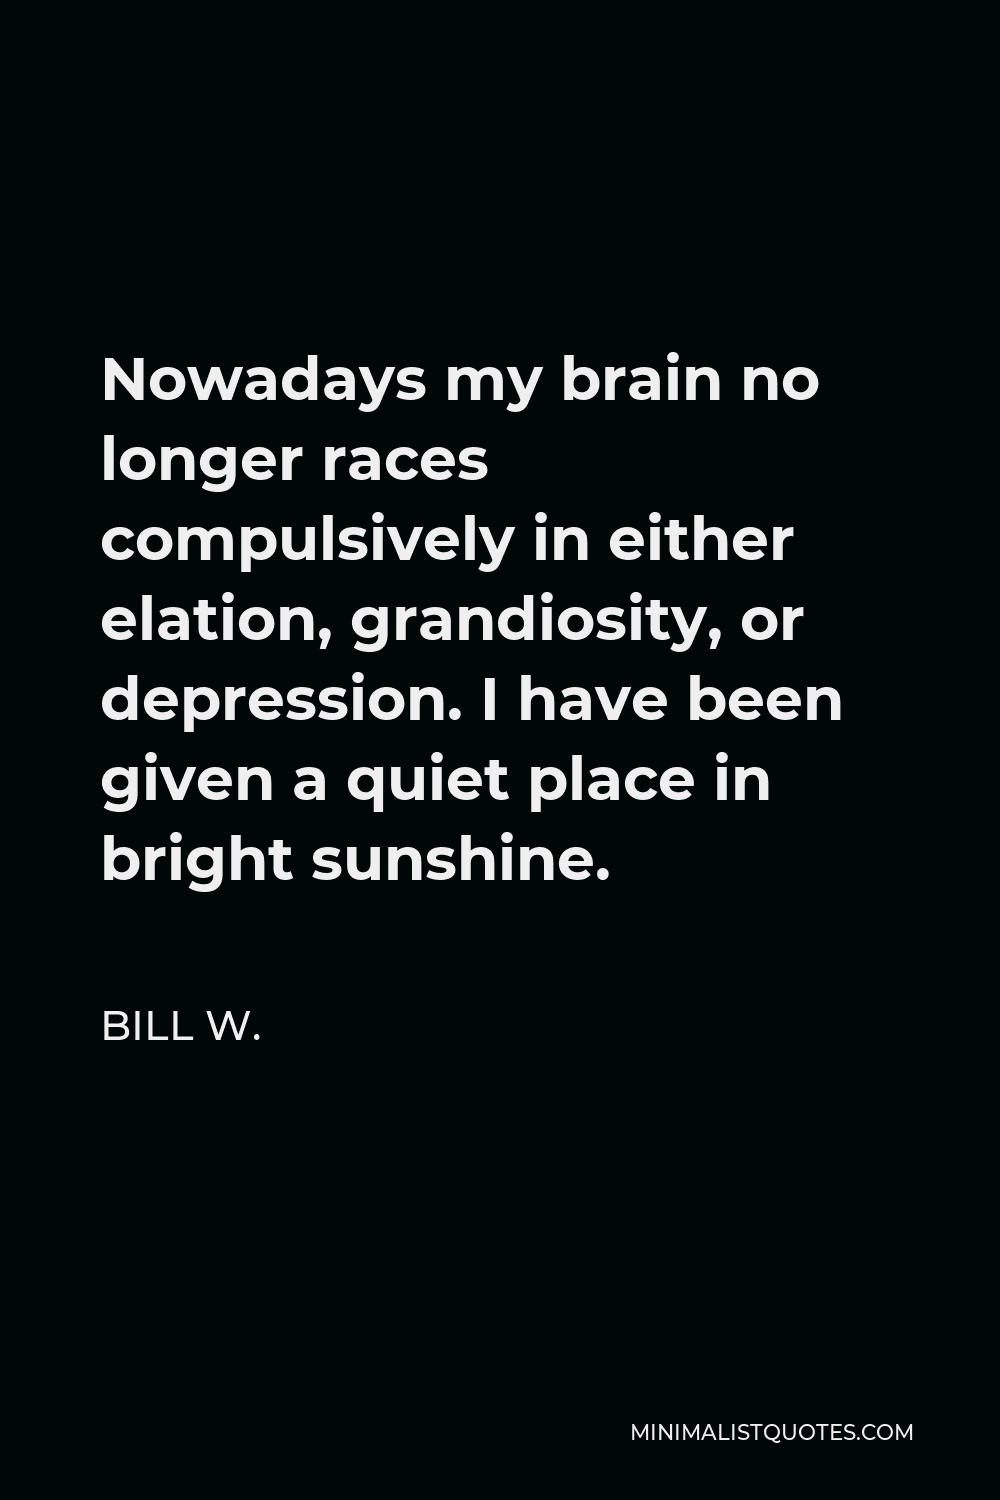 Bill W. Quote - Nowadays my brain no longer races compulsively in either elation, grandiosity, or depression. I have been given a quiet place in bright sunshine.